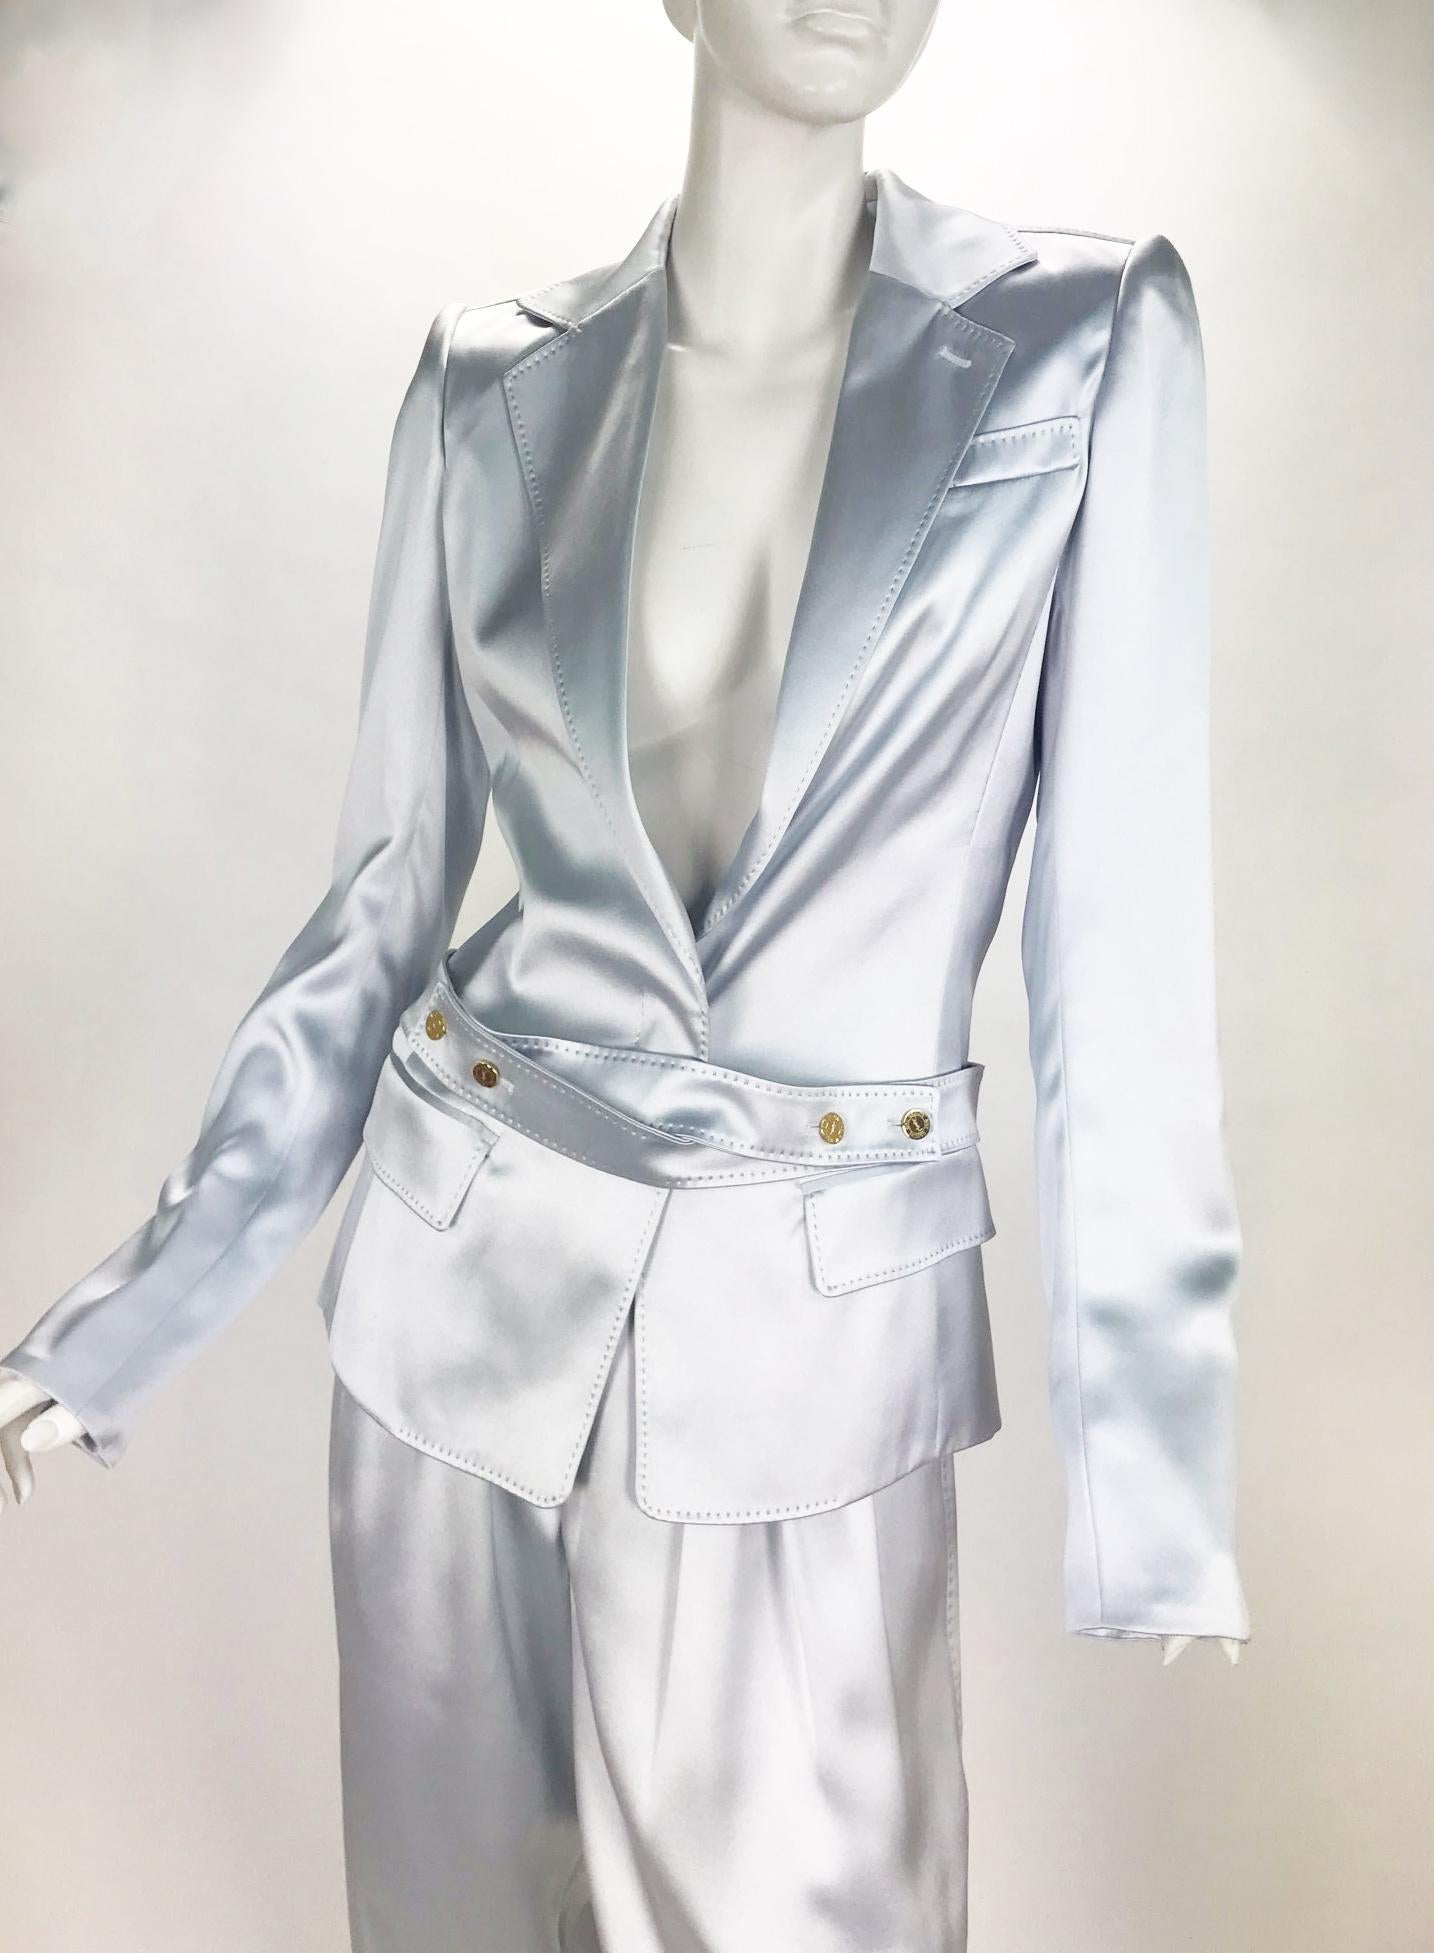 YVES SAINT LAURENT 

Silk Pant Suit

Designed by Tom Ford for Yves Saint Laurent S/S 2004 ready-to-wear collection.

Look # 1
Incredibly Rare!
Size FR 36 - US 4 

Made in France

The jacket is finished with belt. 
Pants are embellished with multiple